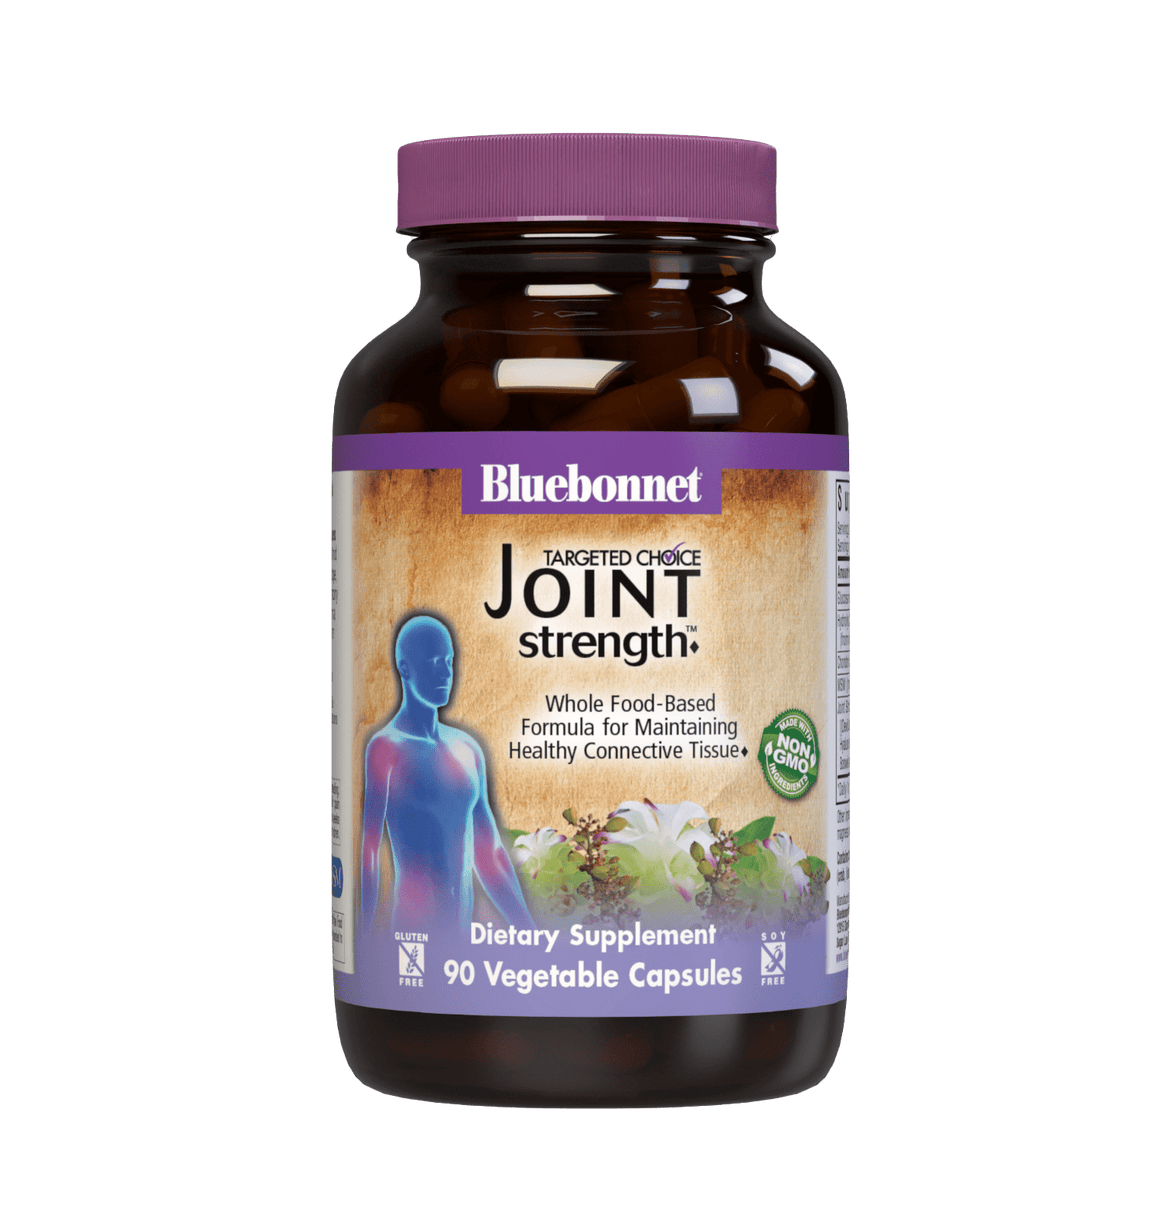 Targeted Choice® Joint Strength - Bluebonnet Nutrition - 90 capsules